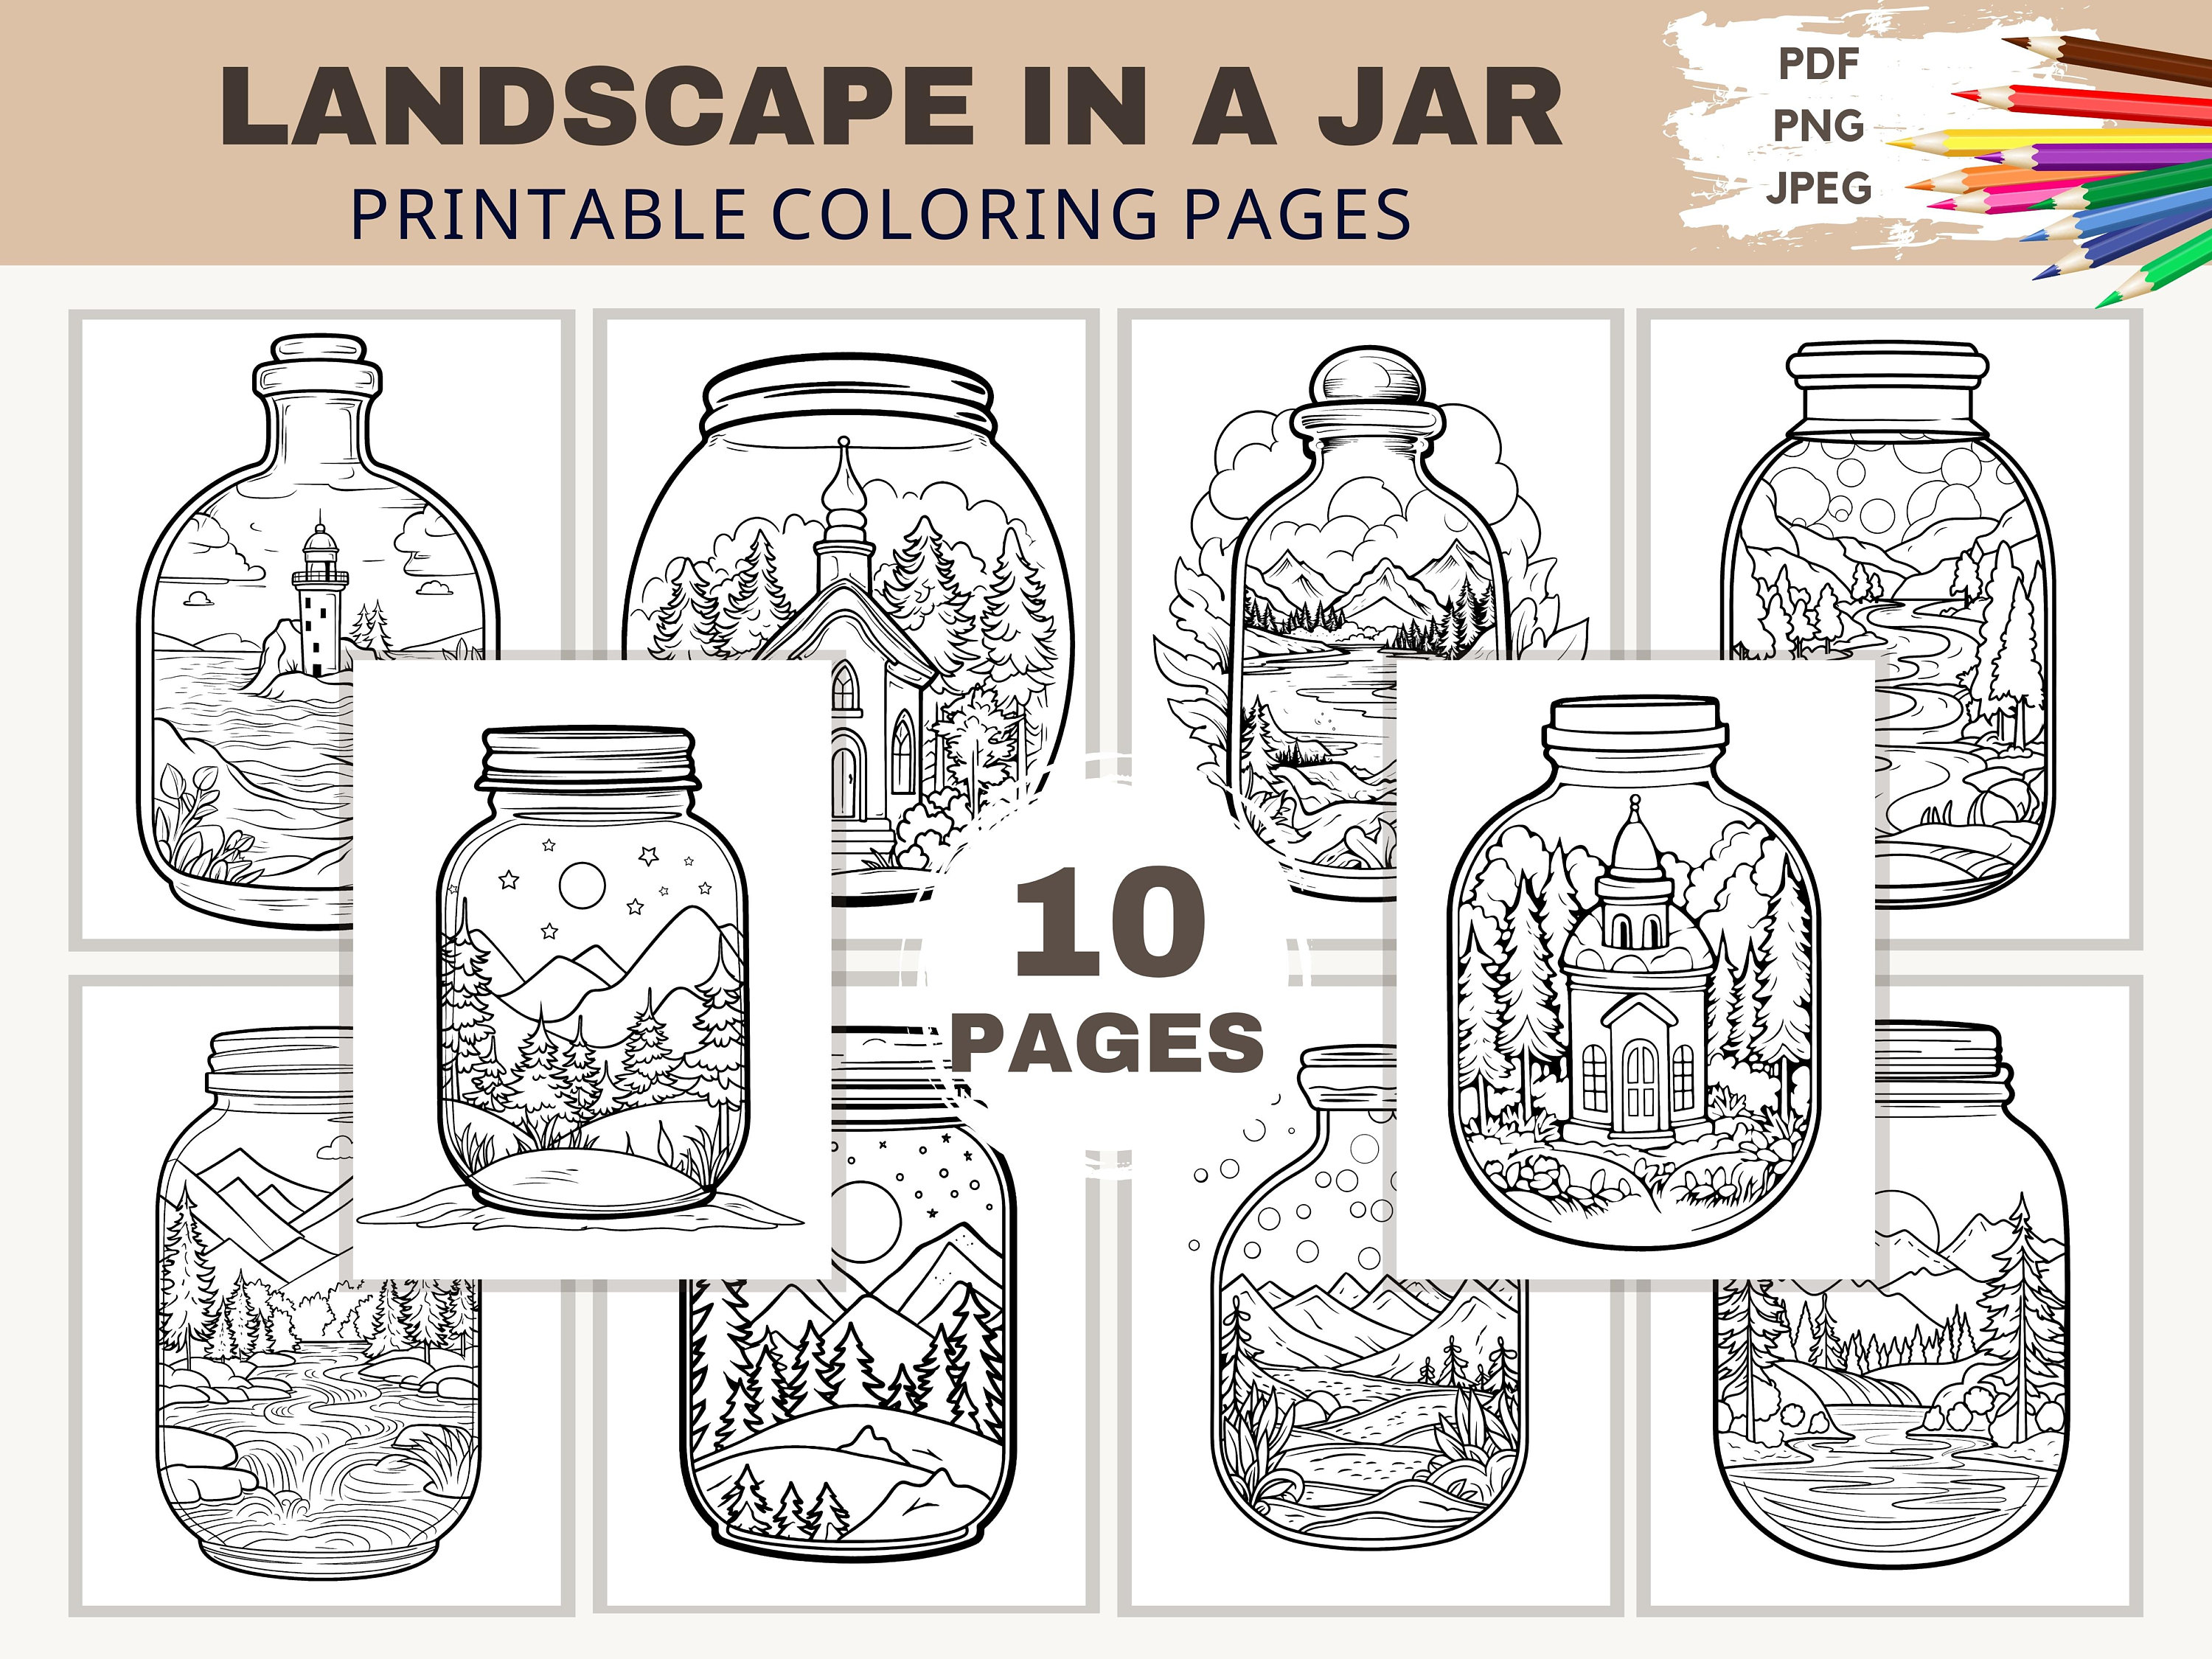 Landscape in a jar coloring page printable coloring pages for kids adults pdf jpeg png simple easy coloring sheet digital download download now